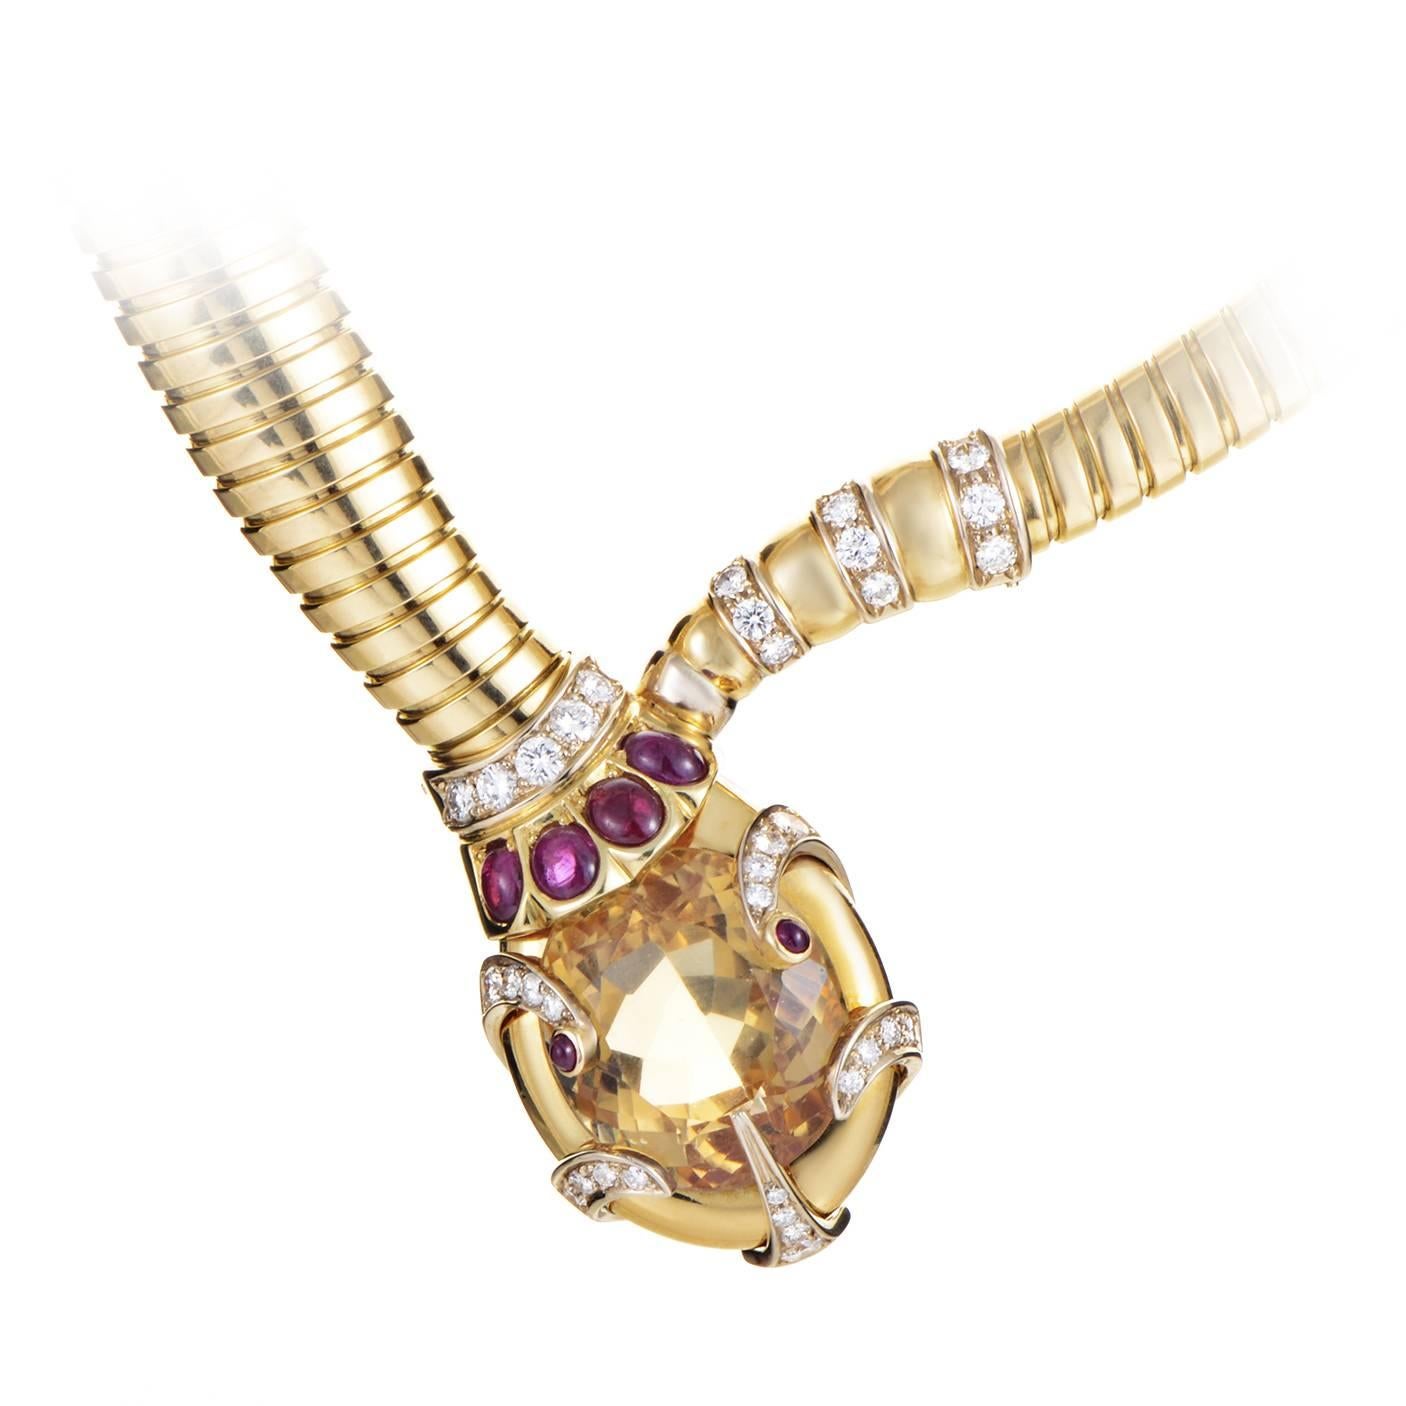 Bulgari delivers on the luxury and style with this extremely rare vintage necklace. The segmented 18K Yellow Gold chain drops with a supple cast like vertebra of a serpent. The chain culminates in a pendant that is ingeniously abstract yet